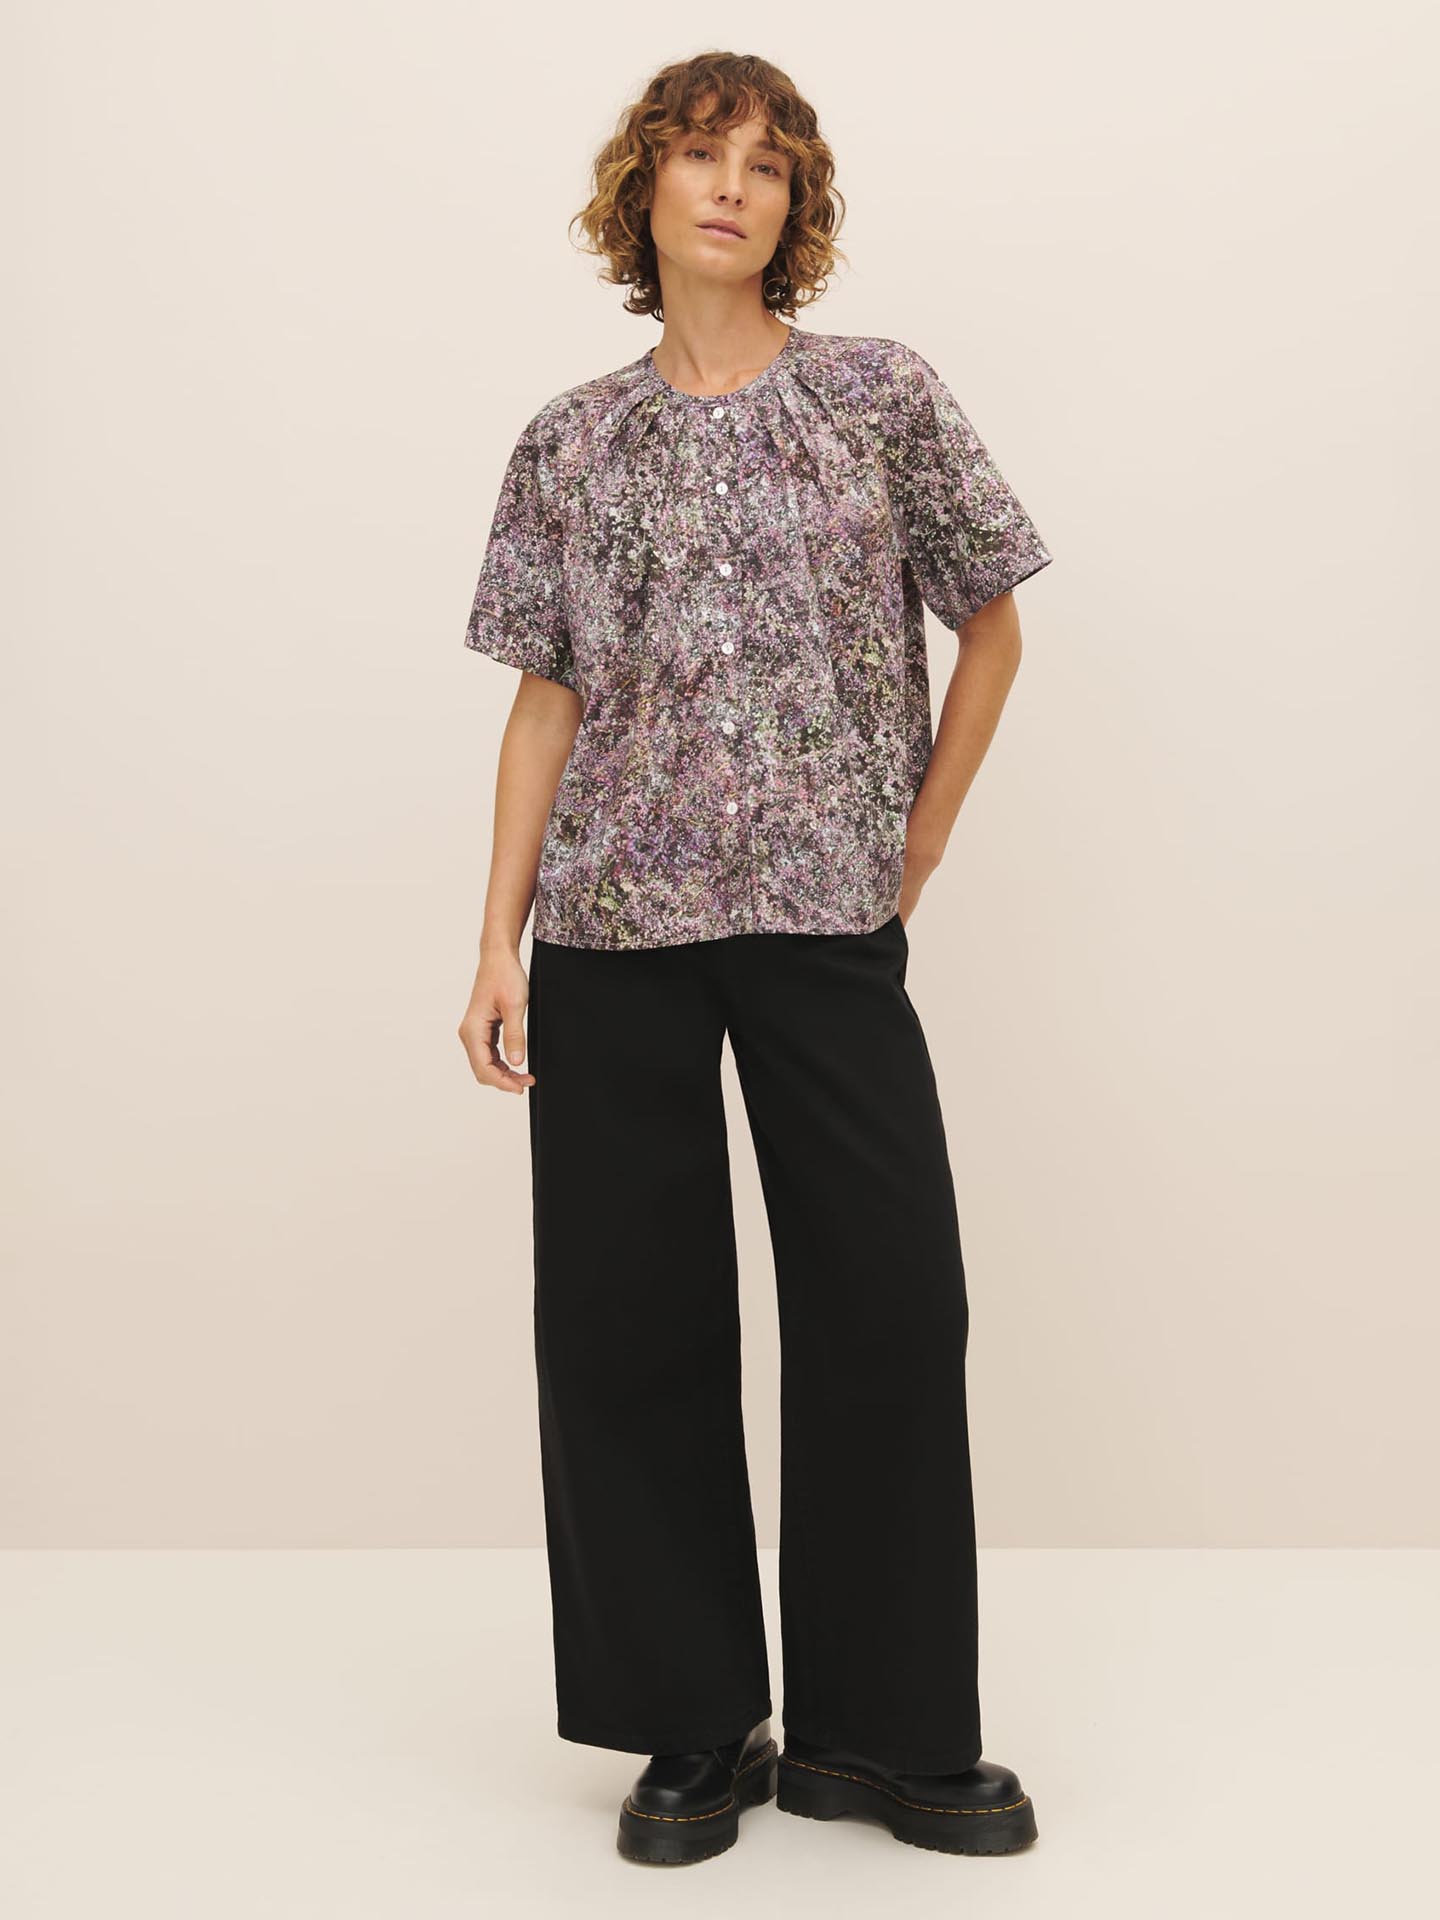 A person wearing a Kowtow Etude Top – Bouquet paired with black trousers and black shoes against a neutral background.